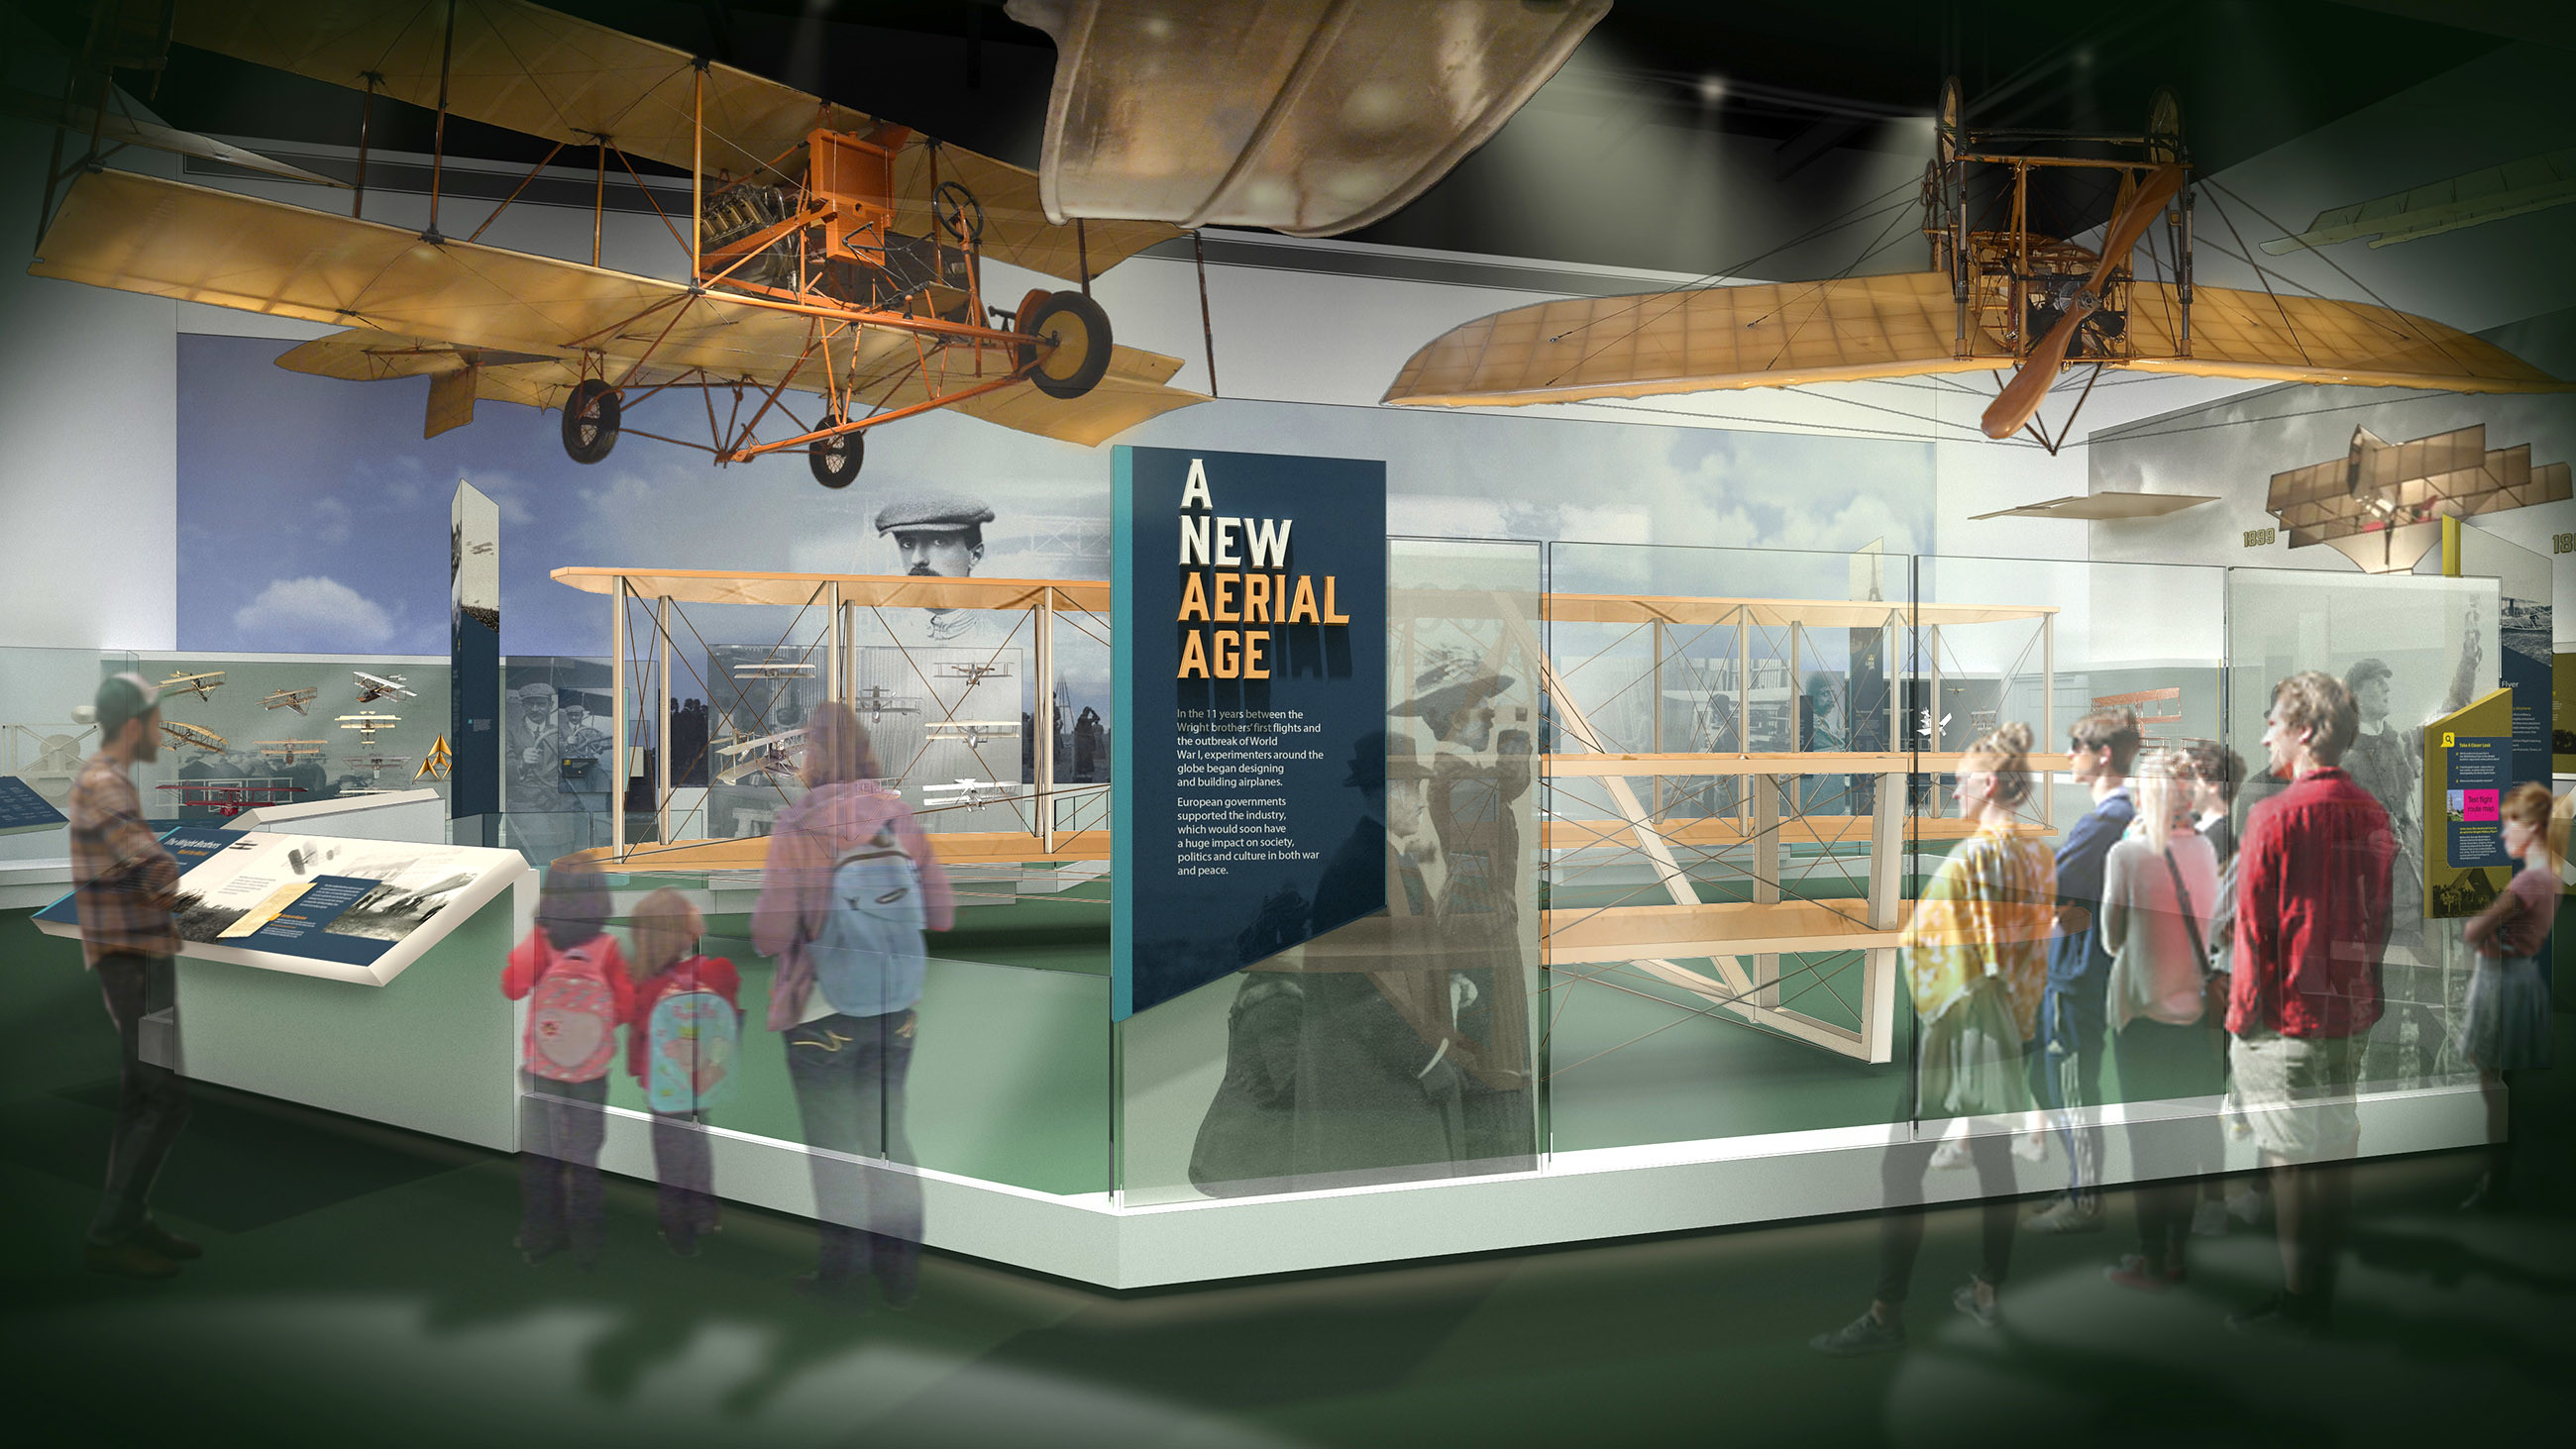 An artist's rendering showing a gallery with old planes.